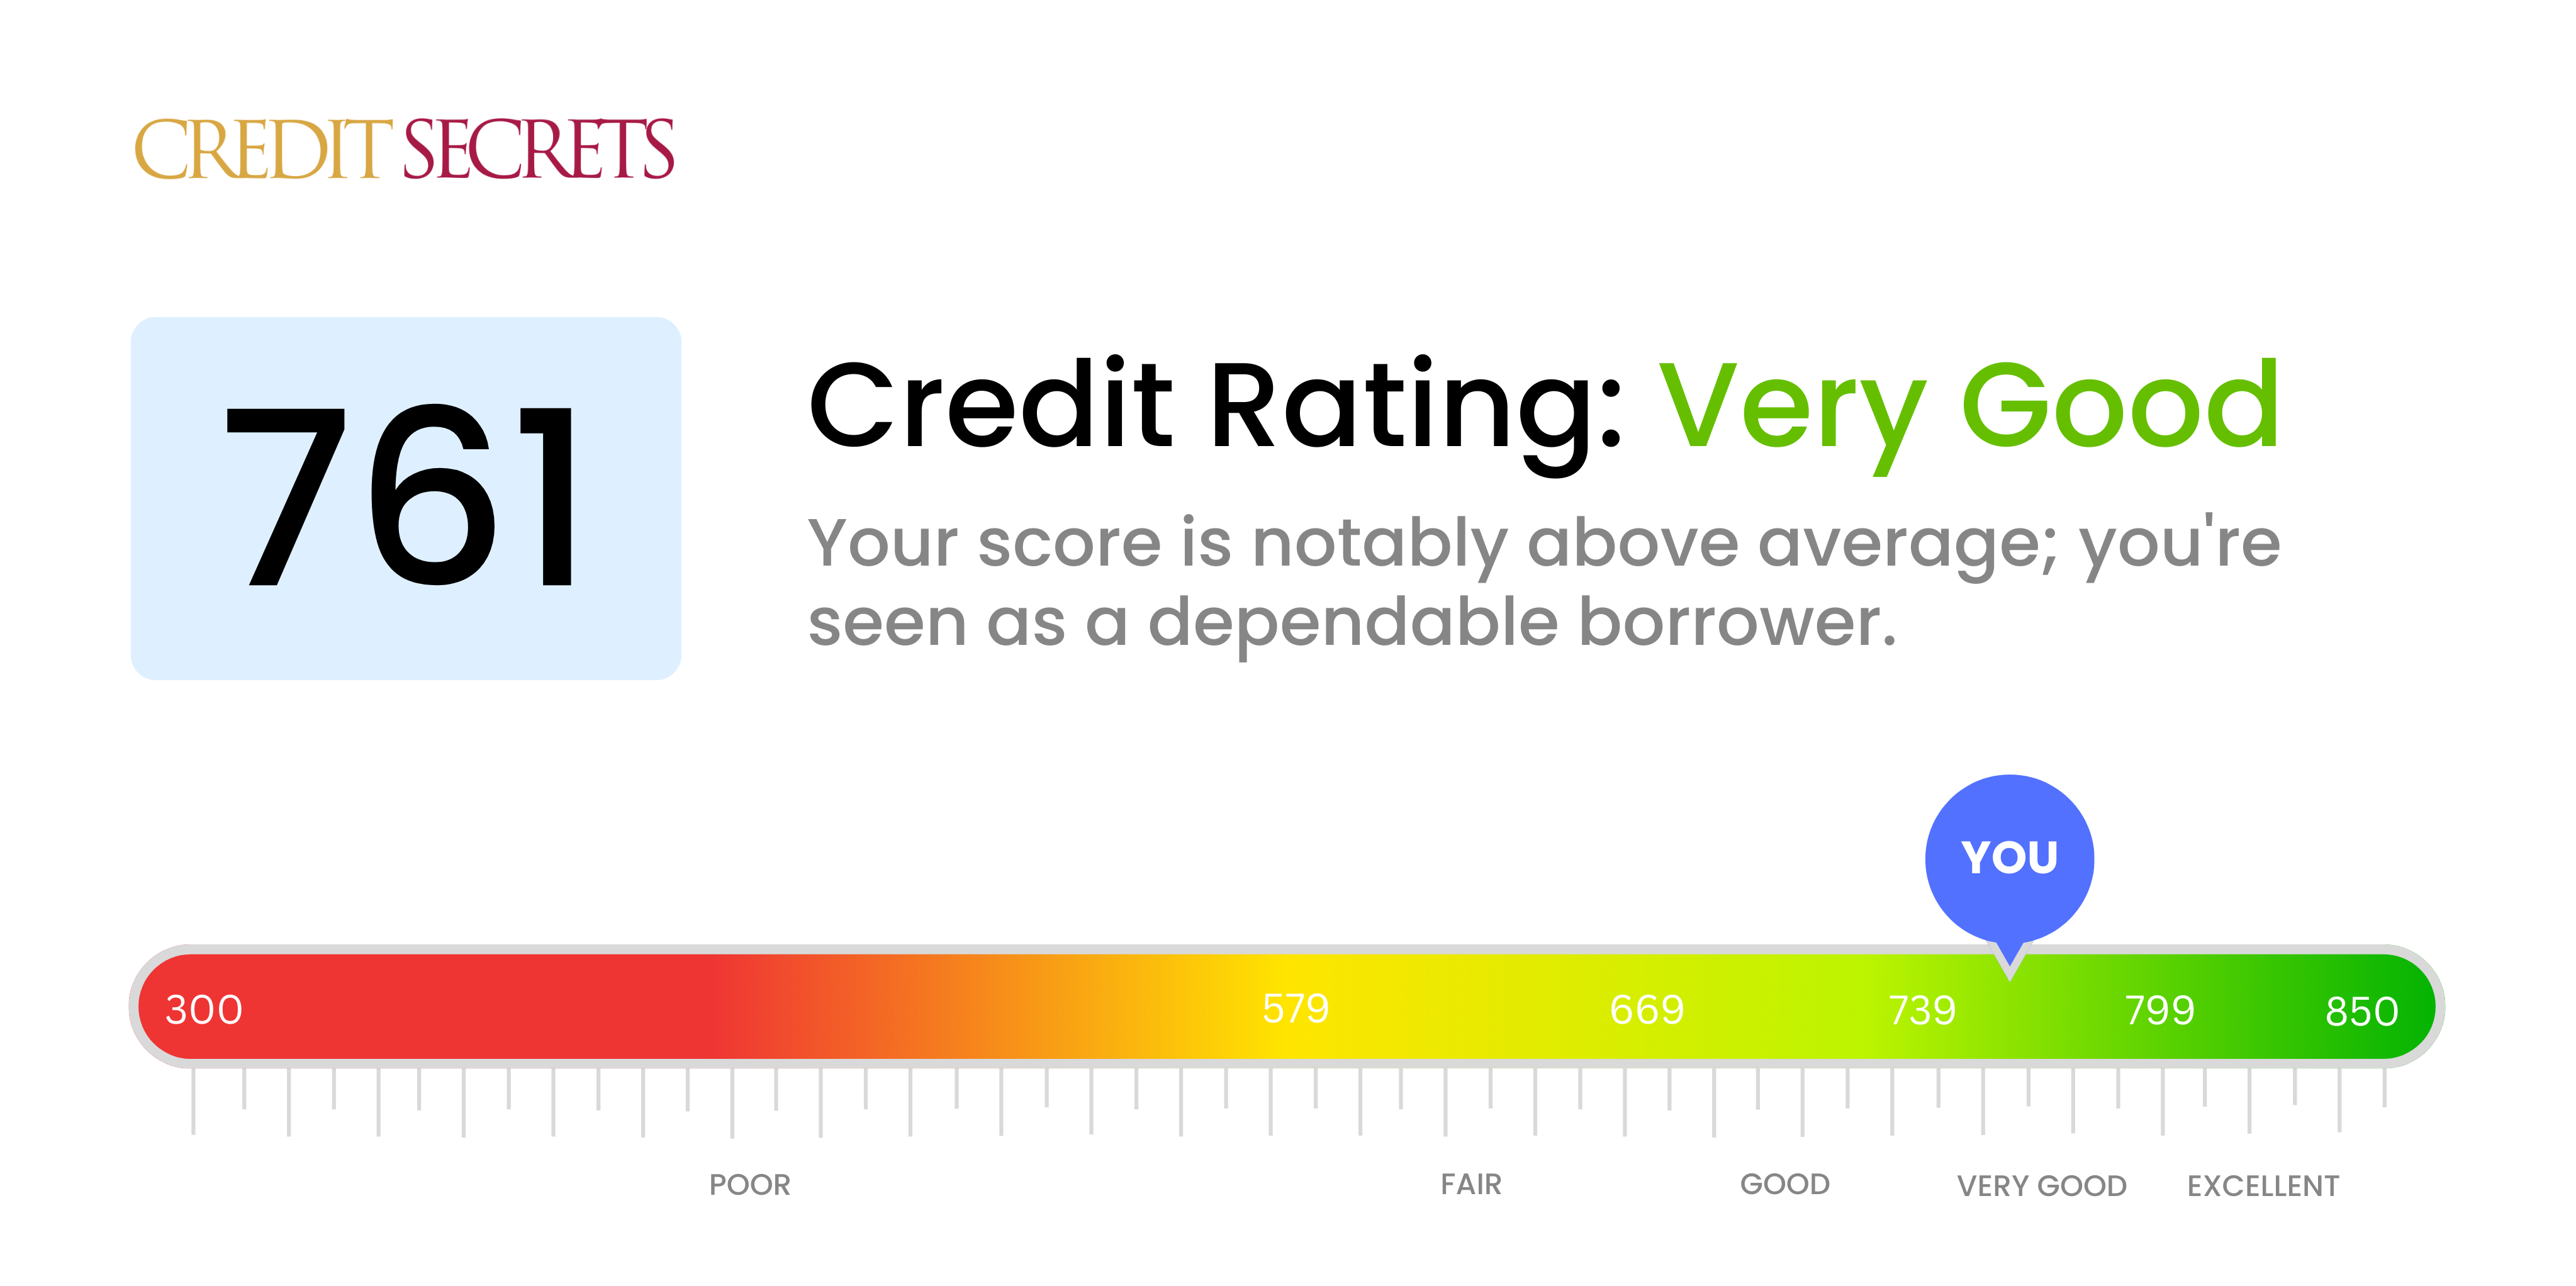 Is 761 a good credit score?